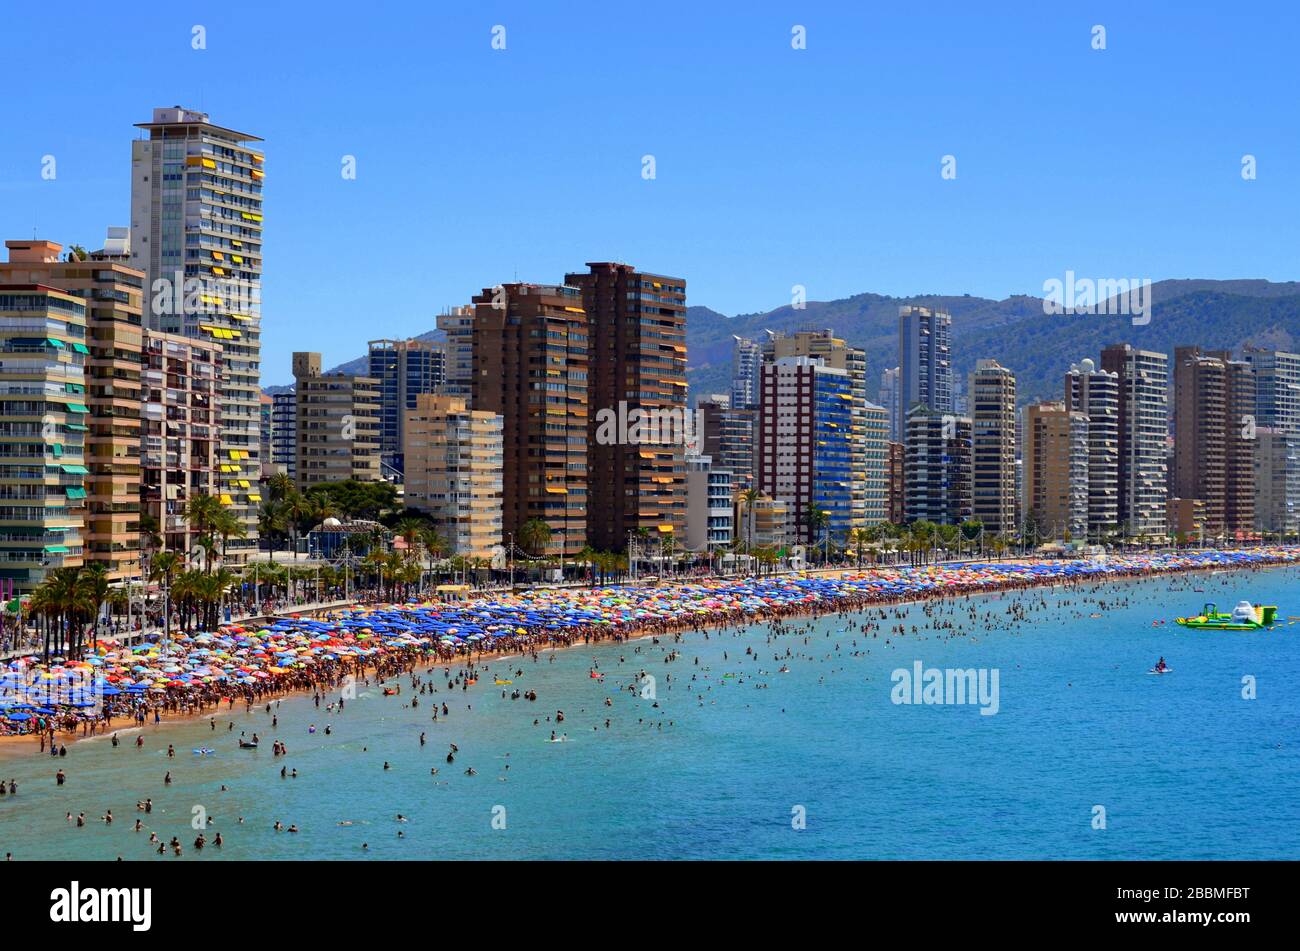 Levante Beach in Benidorm at the height of summer. There are thousands of parasols along the busy beach. Stock Photo